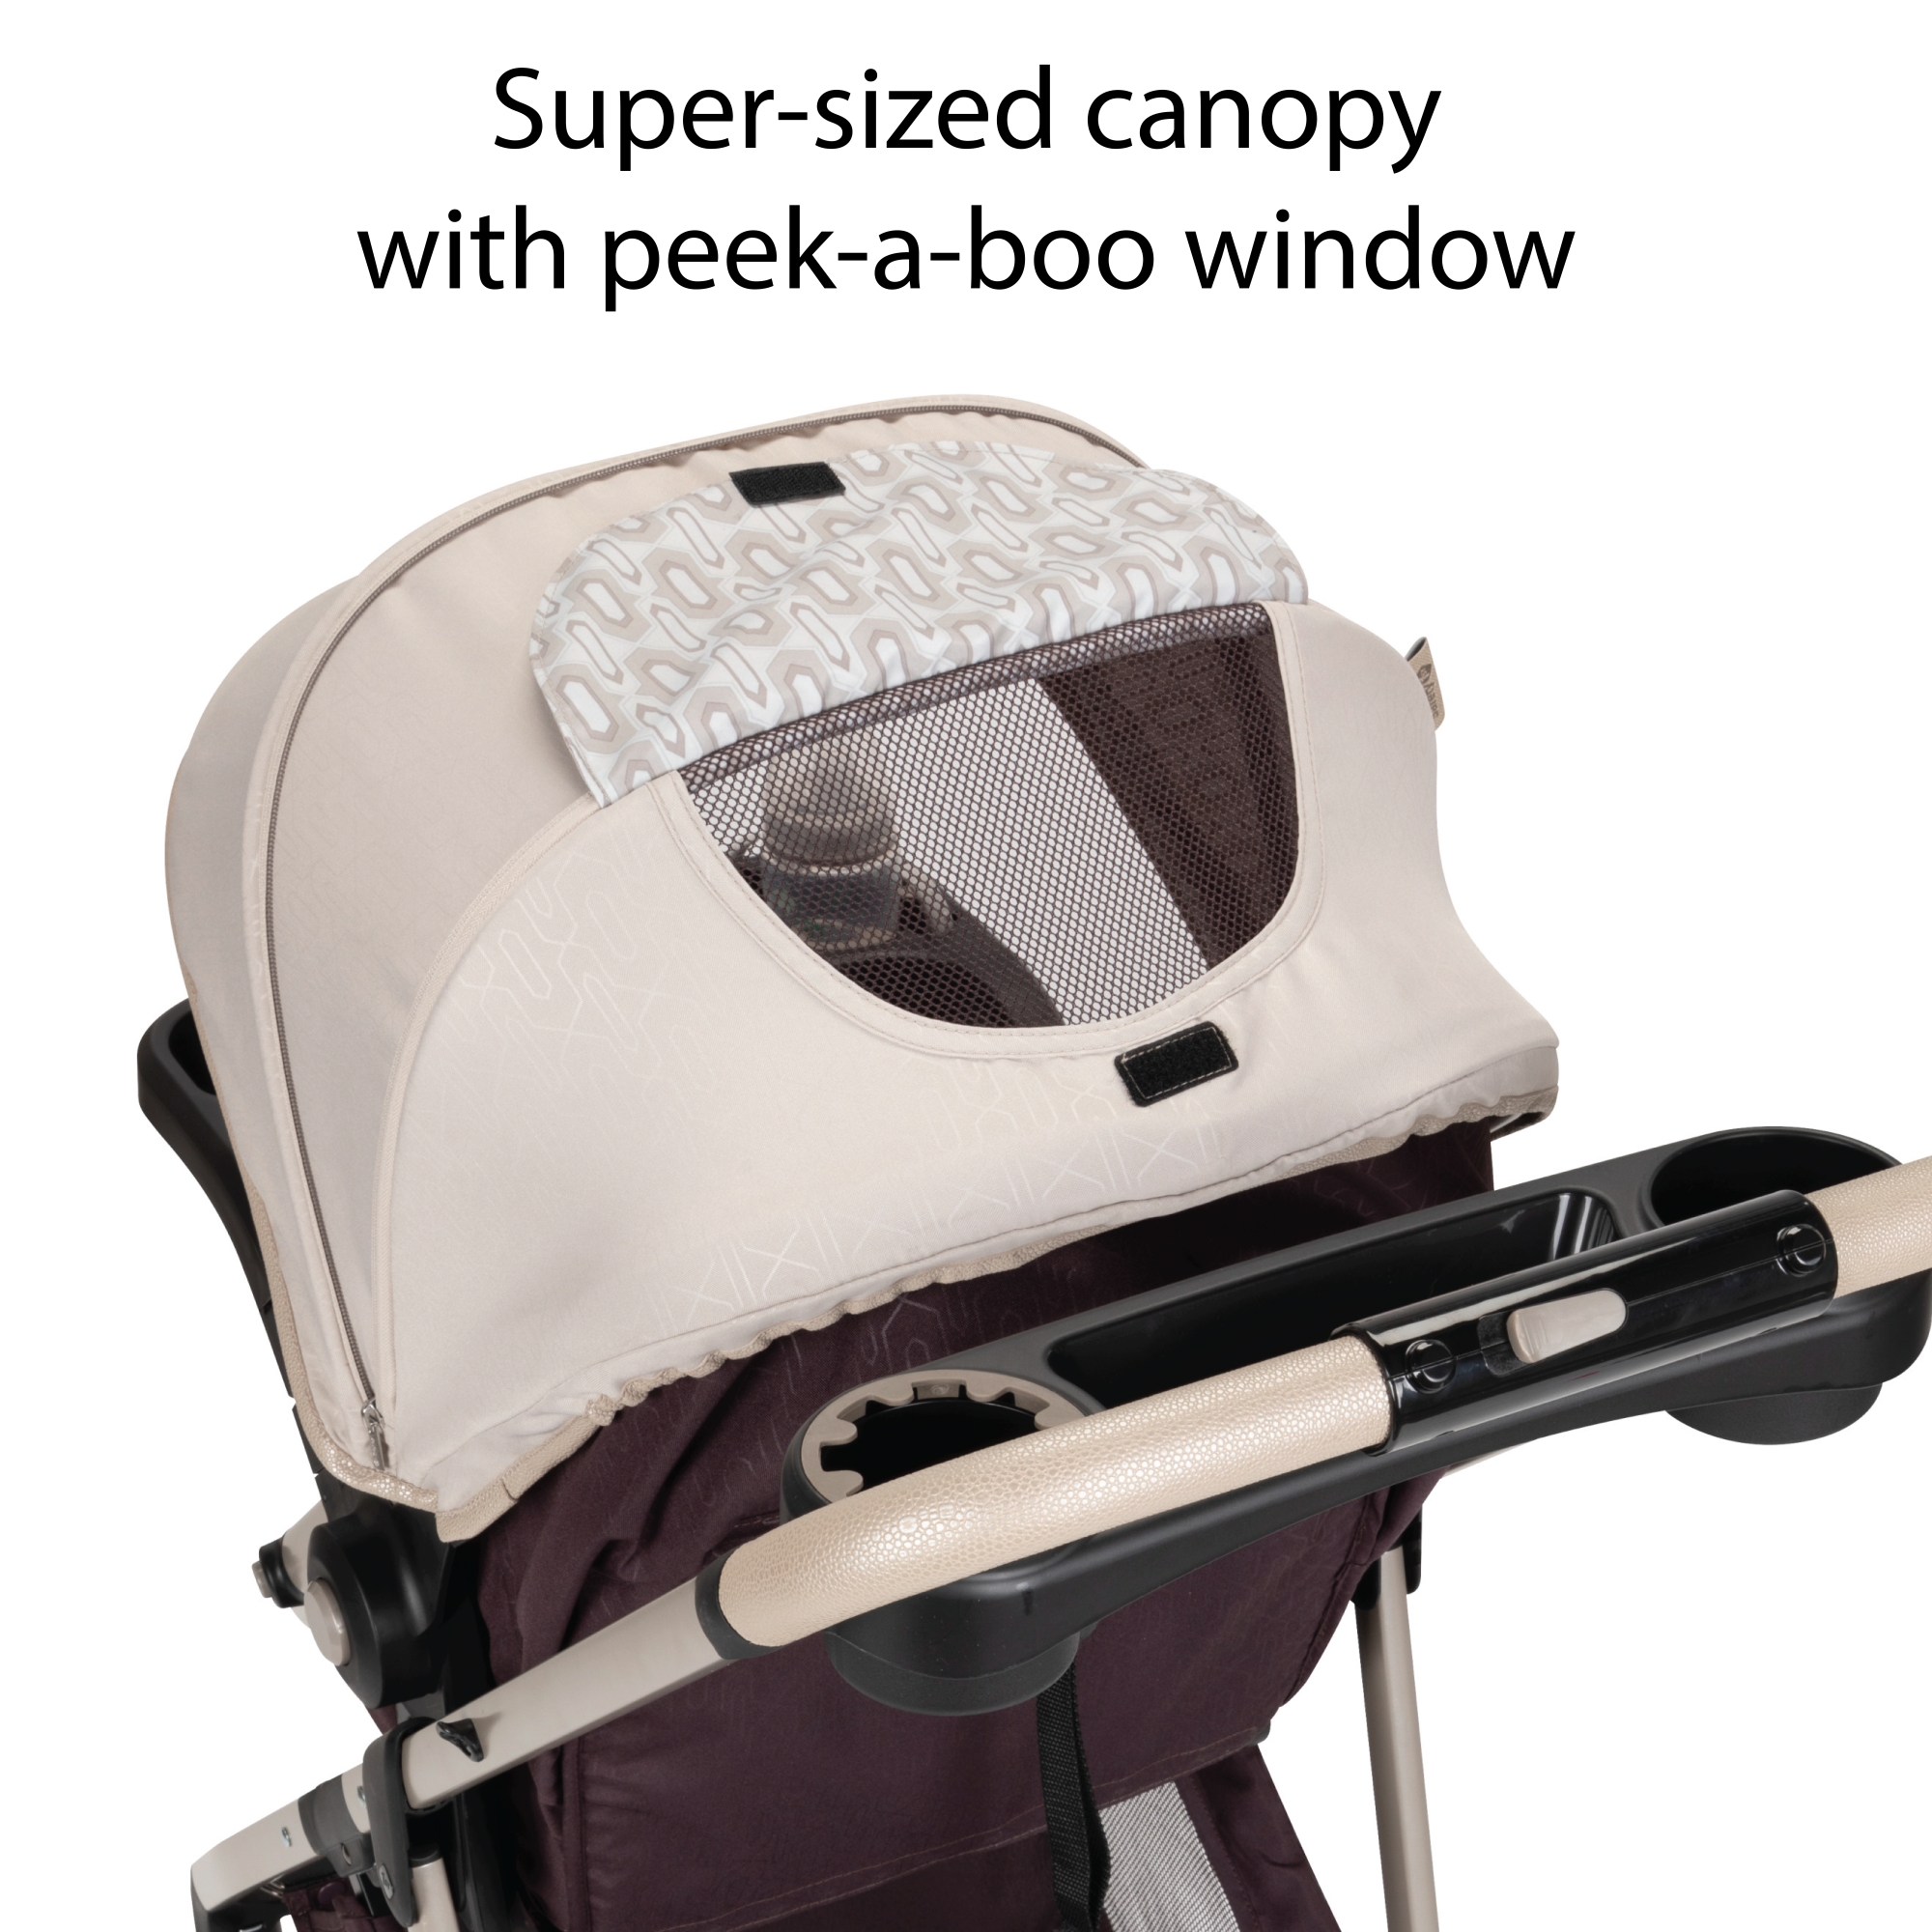 Deluxe Grow and Go™ Flex 8-in-1 Travel System - removable inserts for additional newborn head and body support